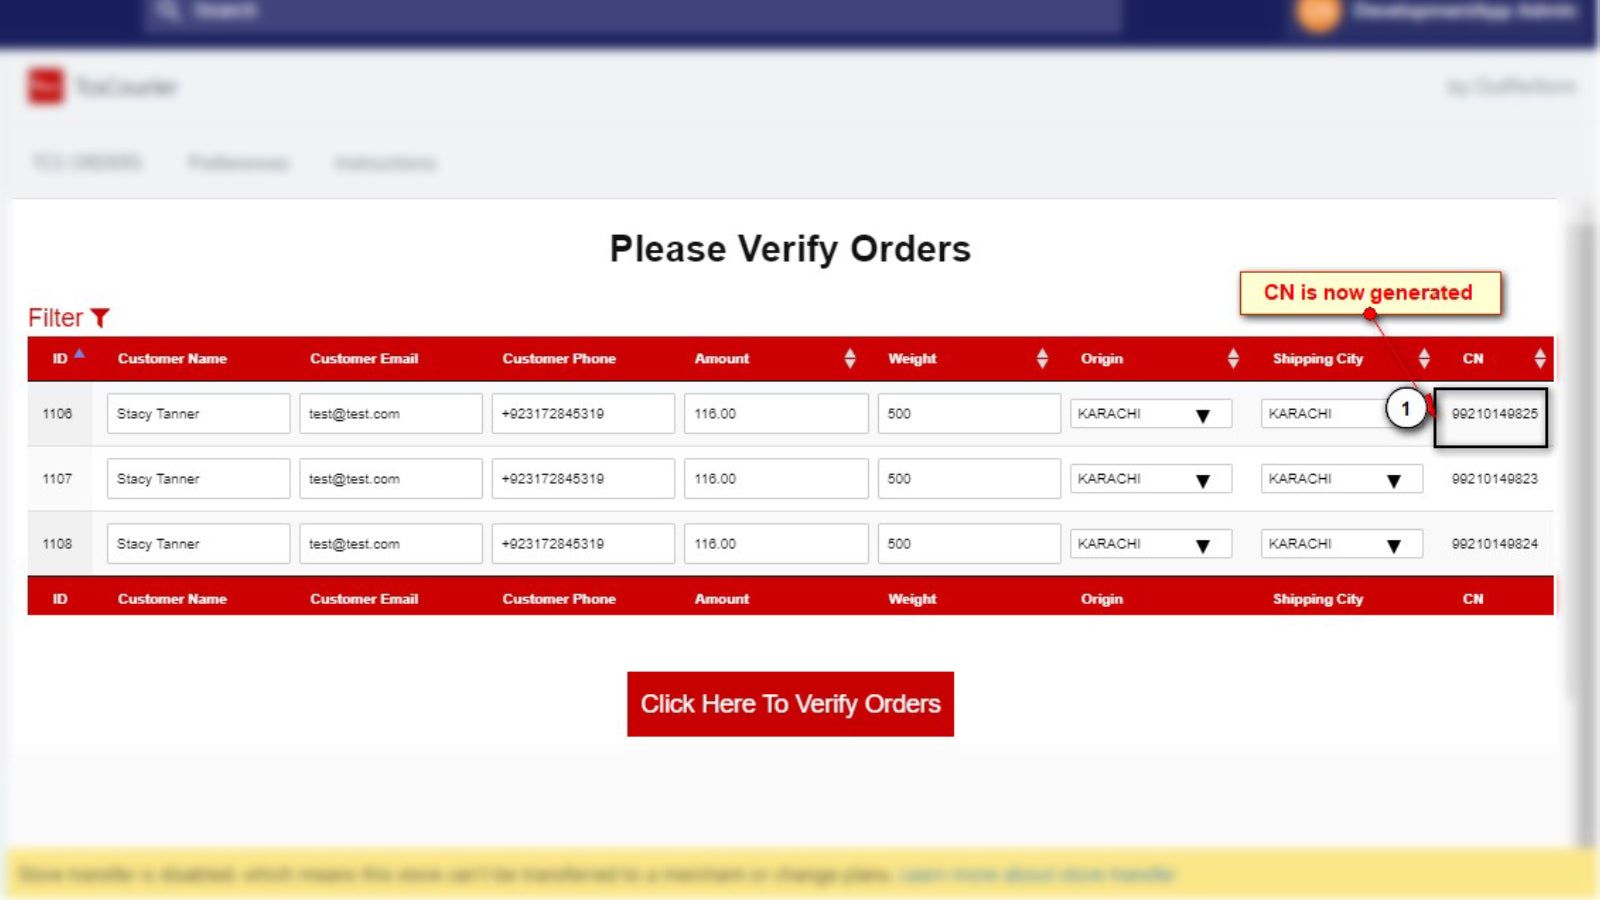 CN generated after orders are verified and pushed to portal. 